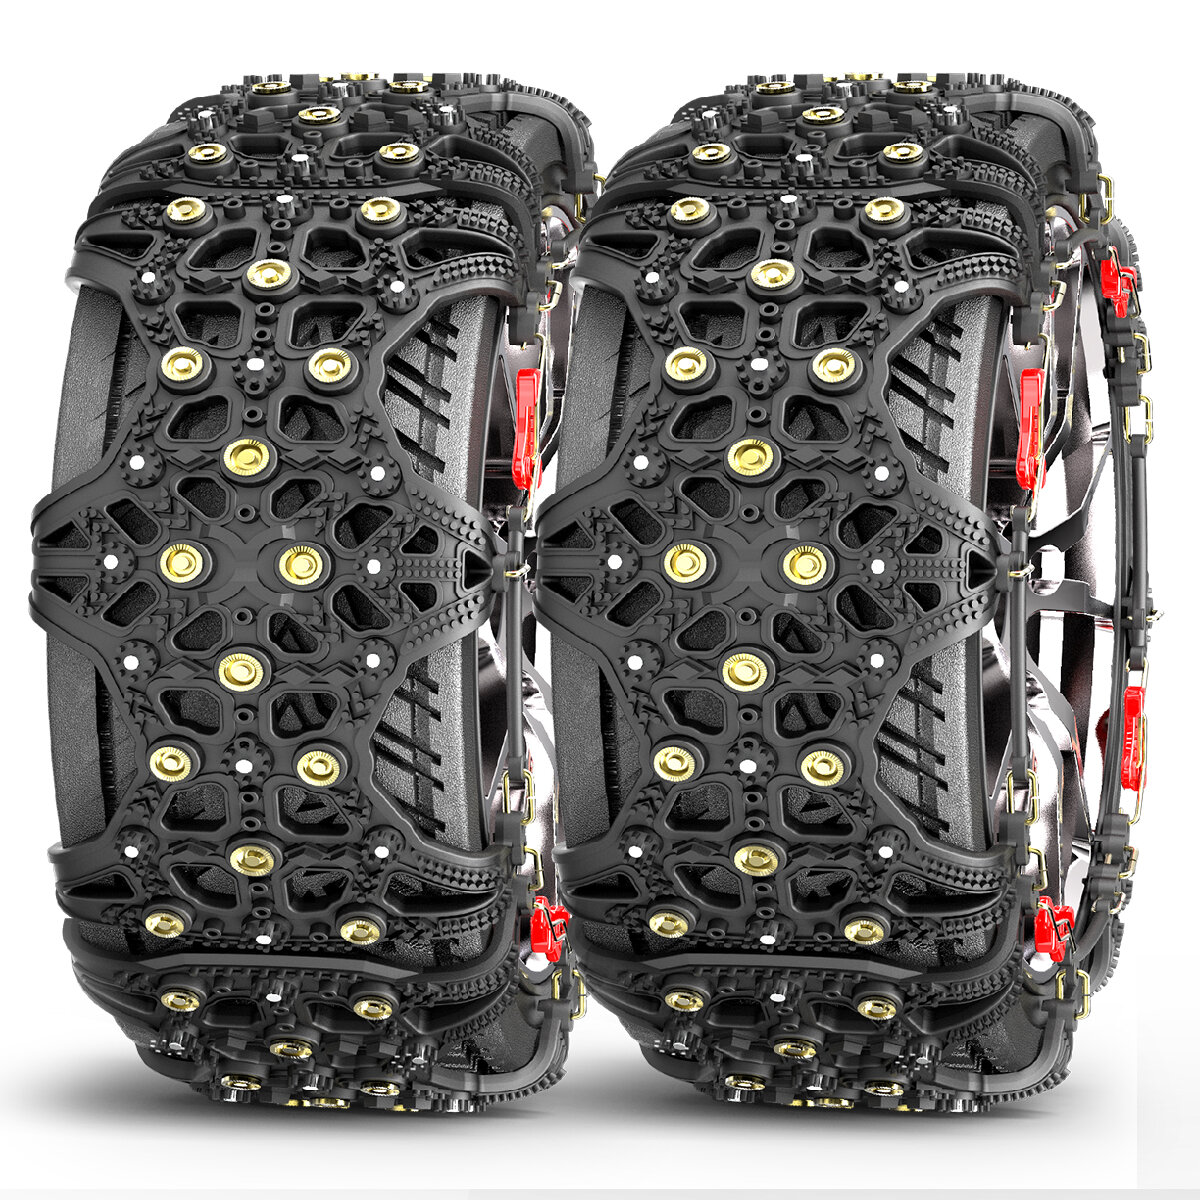 Image of 2pcs Full Cover Tire Snow Chains Anti-Slip Sand Muddy Roads with Quenched Steel Studs Winter Safety Emergency Necessitie